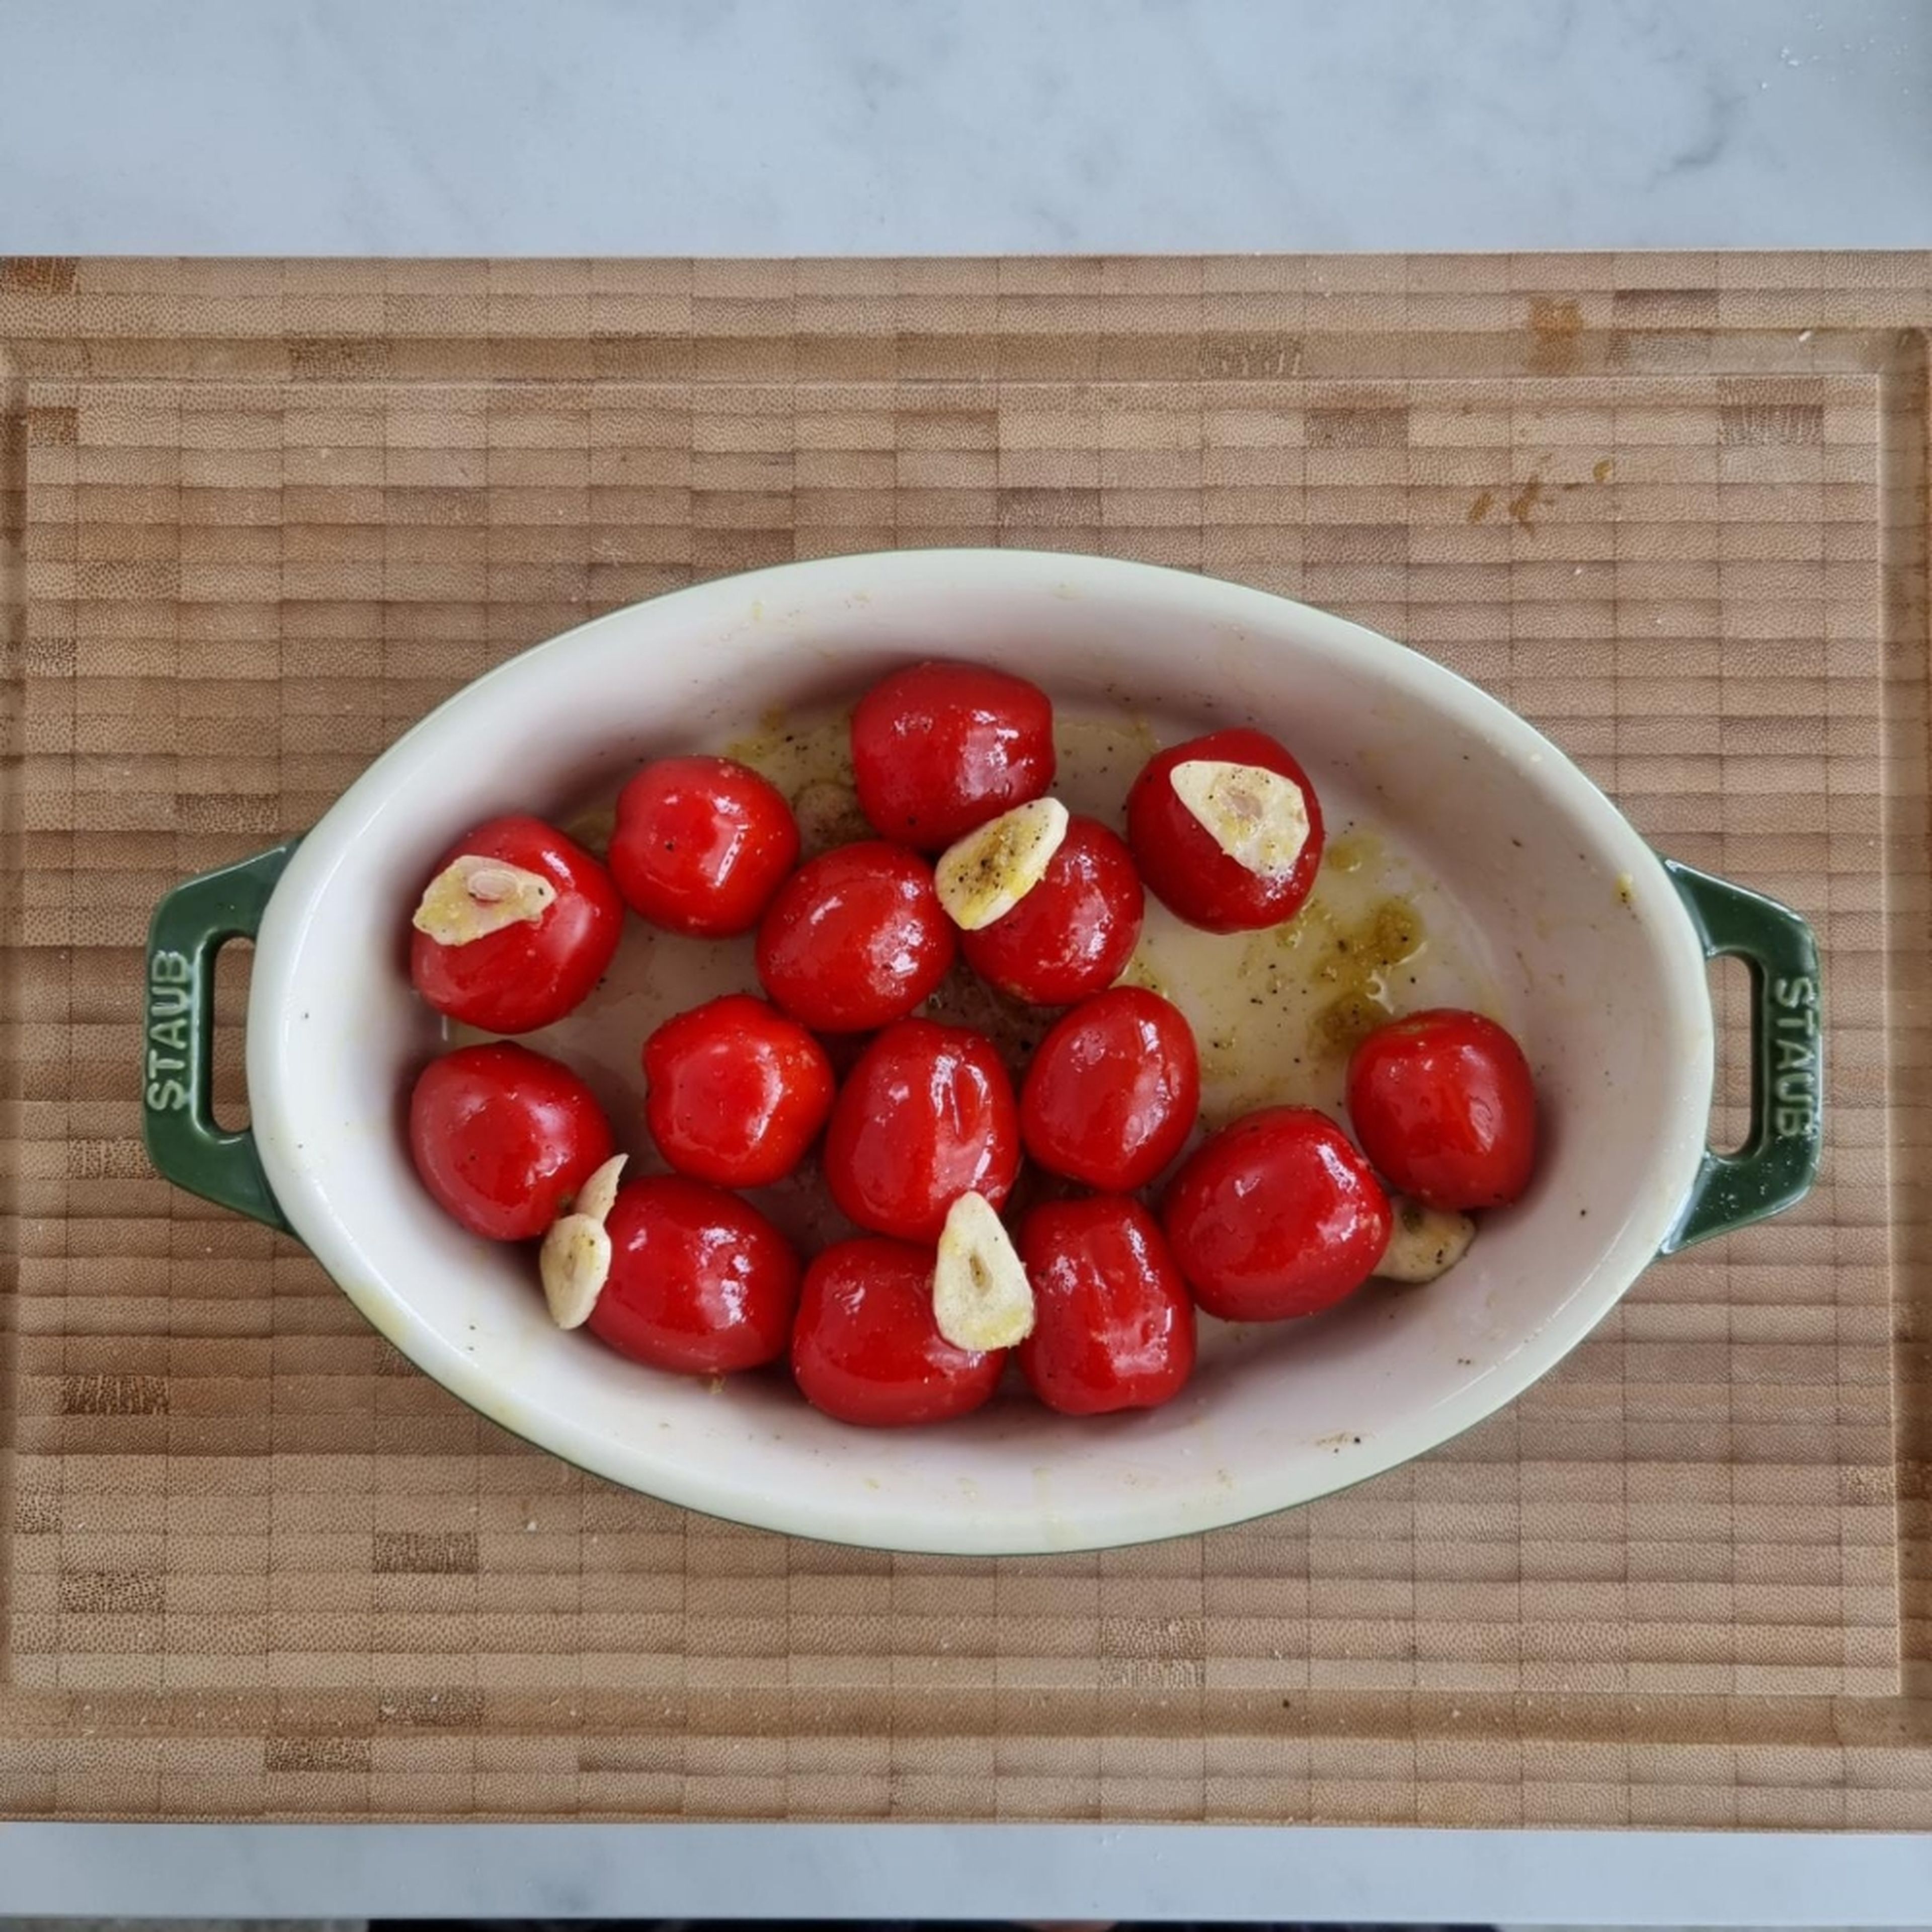 Combine the cherry tomatoes, some of the olive oil, lemon zest, half of the sliced garlic, a pinch of sugar, salt and pepper in a baking dish. Bake the tomatoes in the oven for approx. 12 min. Cook the pasta according to package directions.